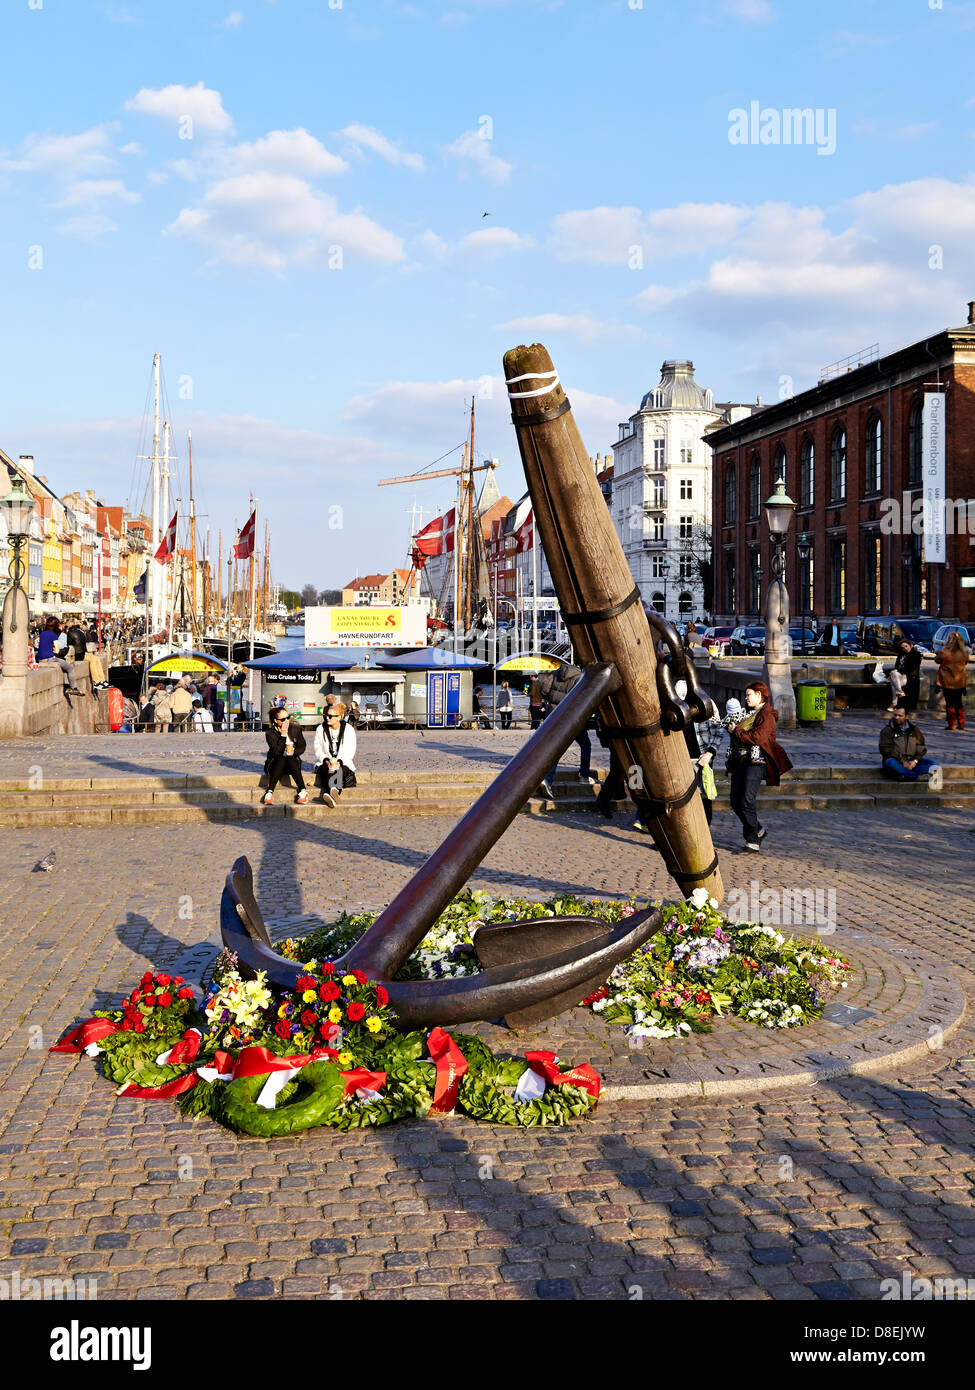 tre Marquee Det er det heldige The "anchor monument" (Mindeankeret) is at Nyhavn, at the corner of Kongens  Nytorv. It commemorates the 1600 Danish sailors killed during the Second  World War. Every year on the 5th May, the